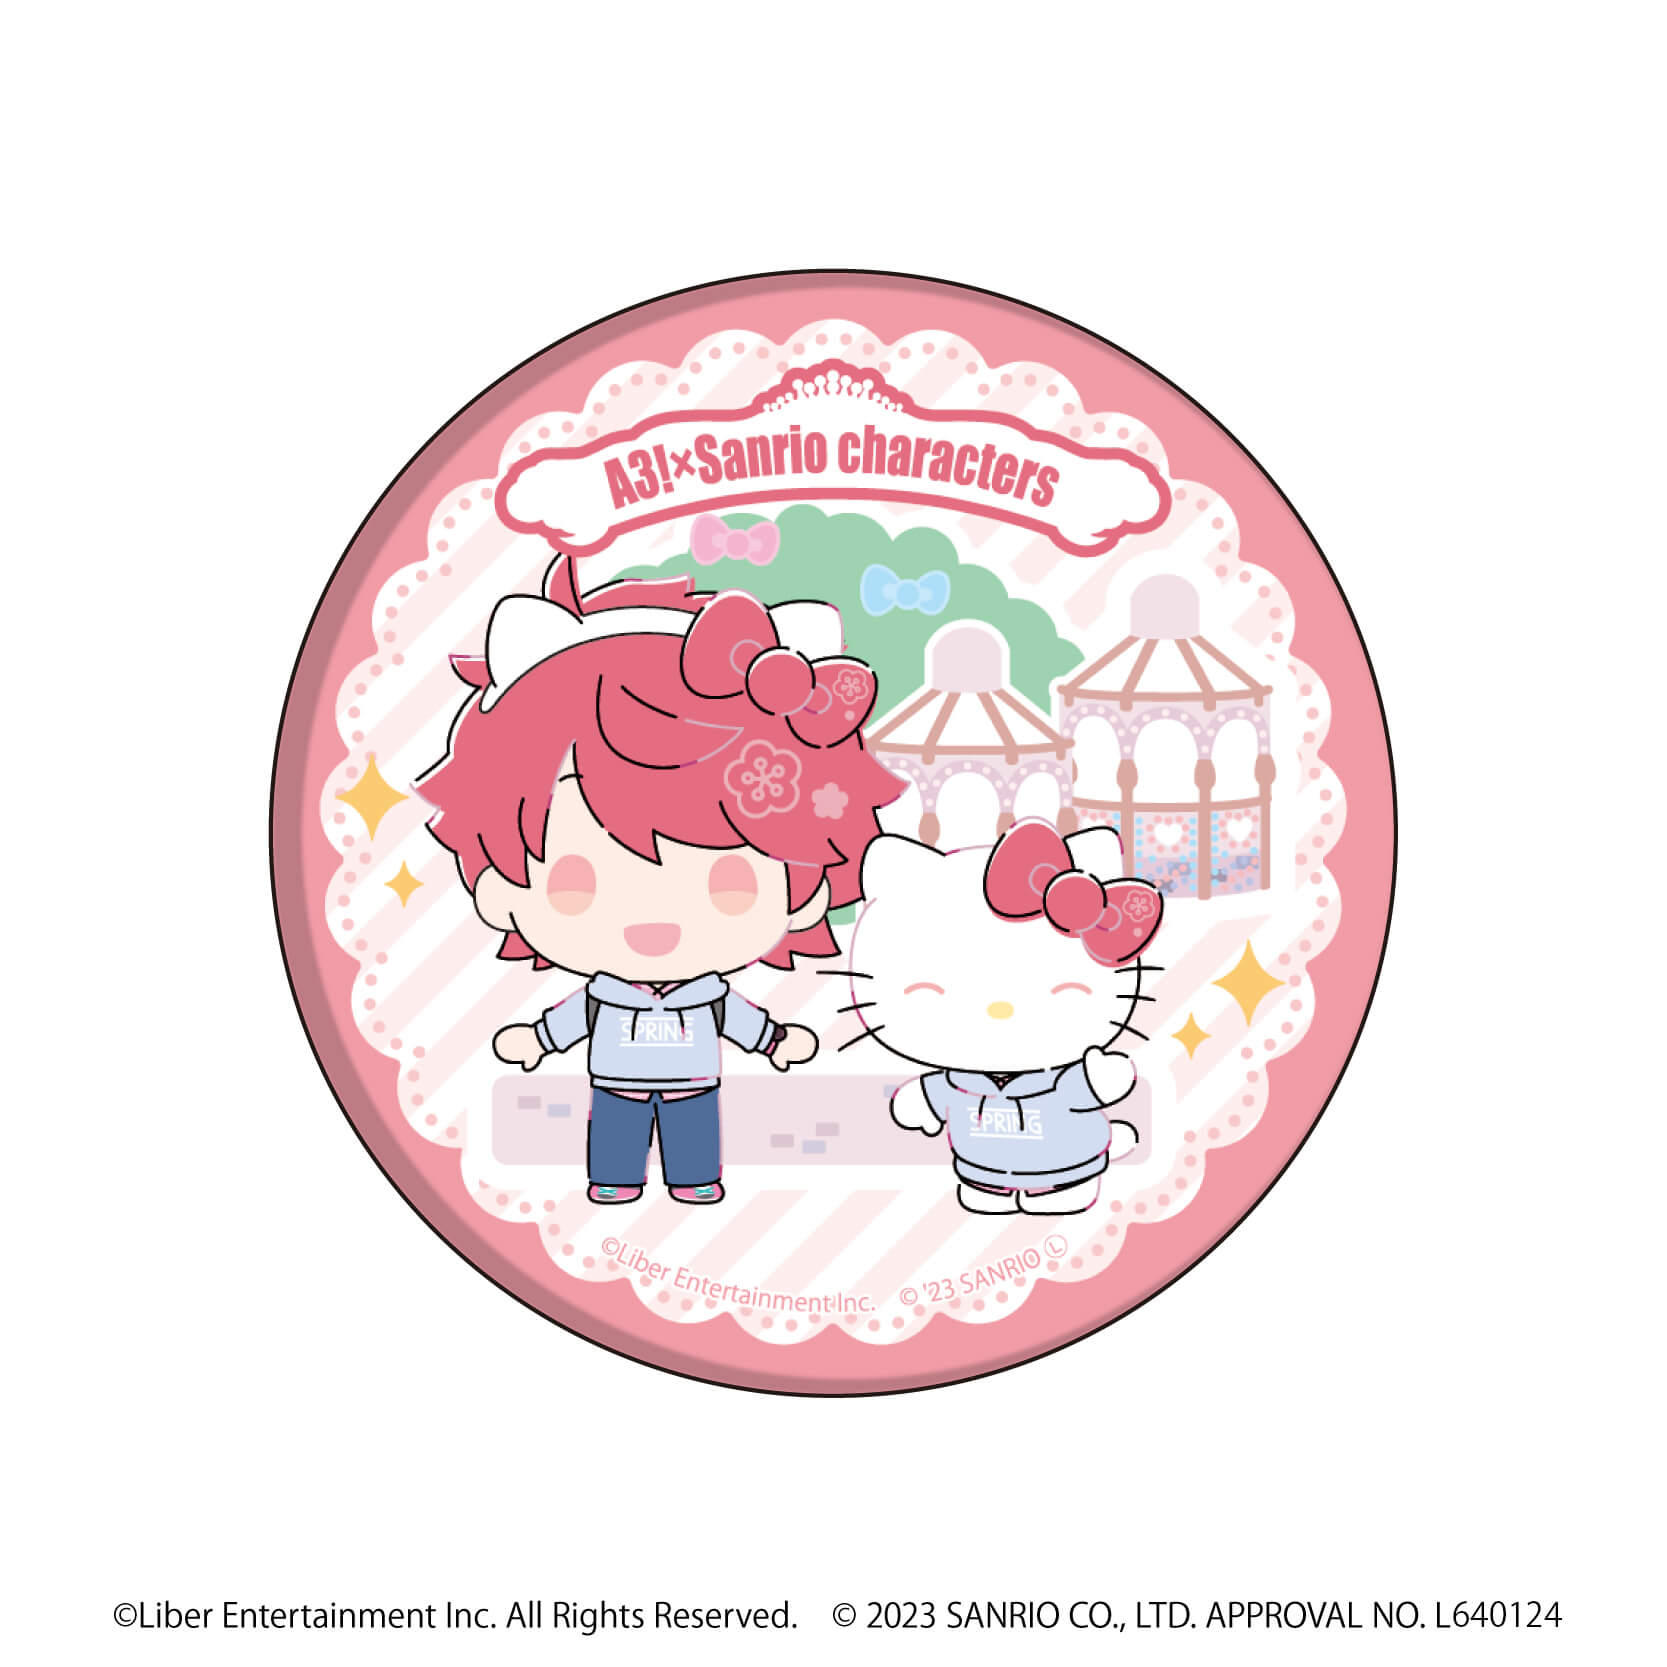 A3!×Sanrio characters｜缶バッジ「A3!×Sanrio characters」03/S＆S ...